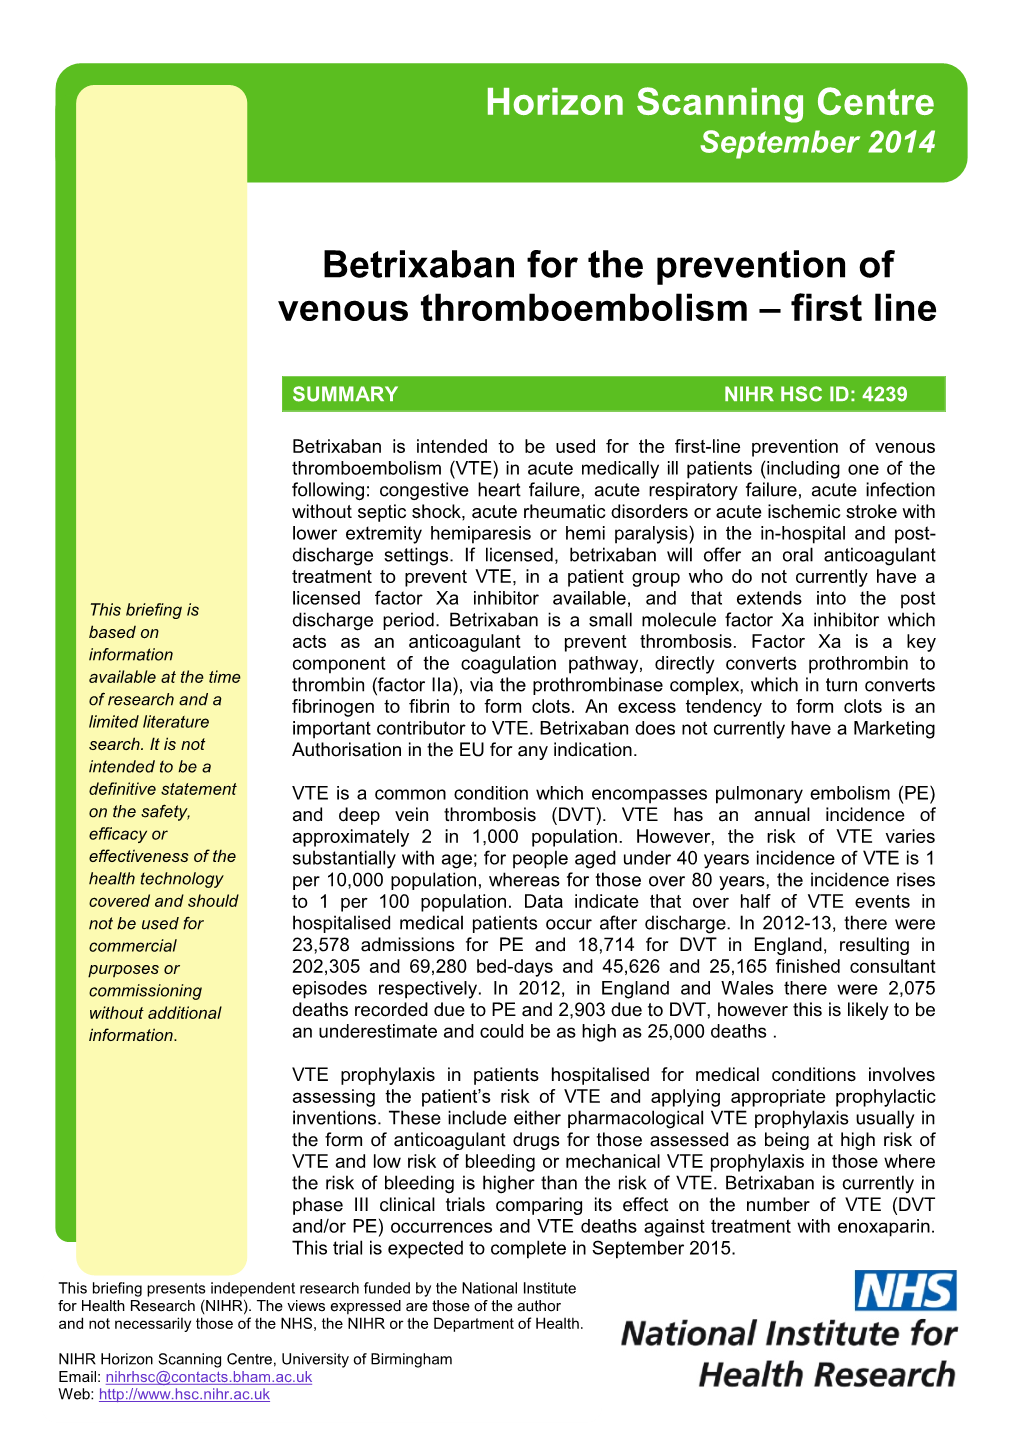 Betrixaban for the Prevention of Venous Thromboembolism – First Line